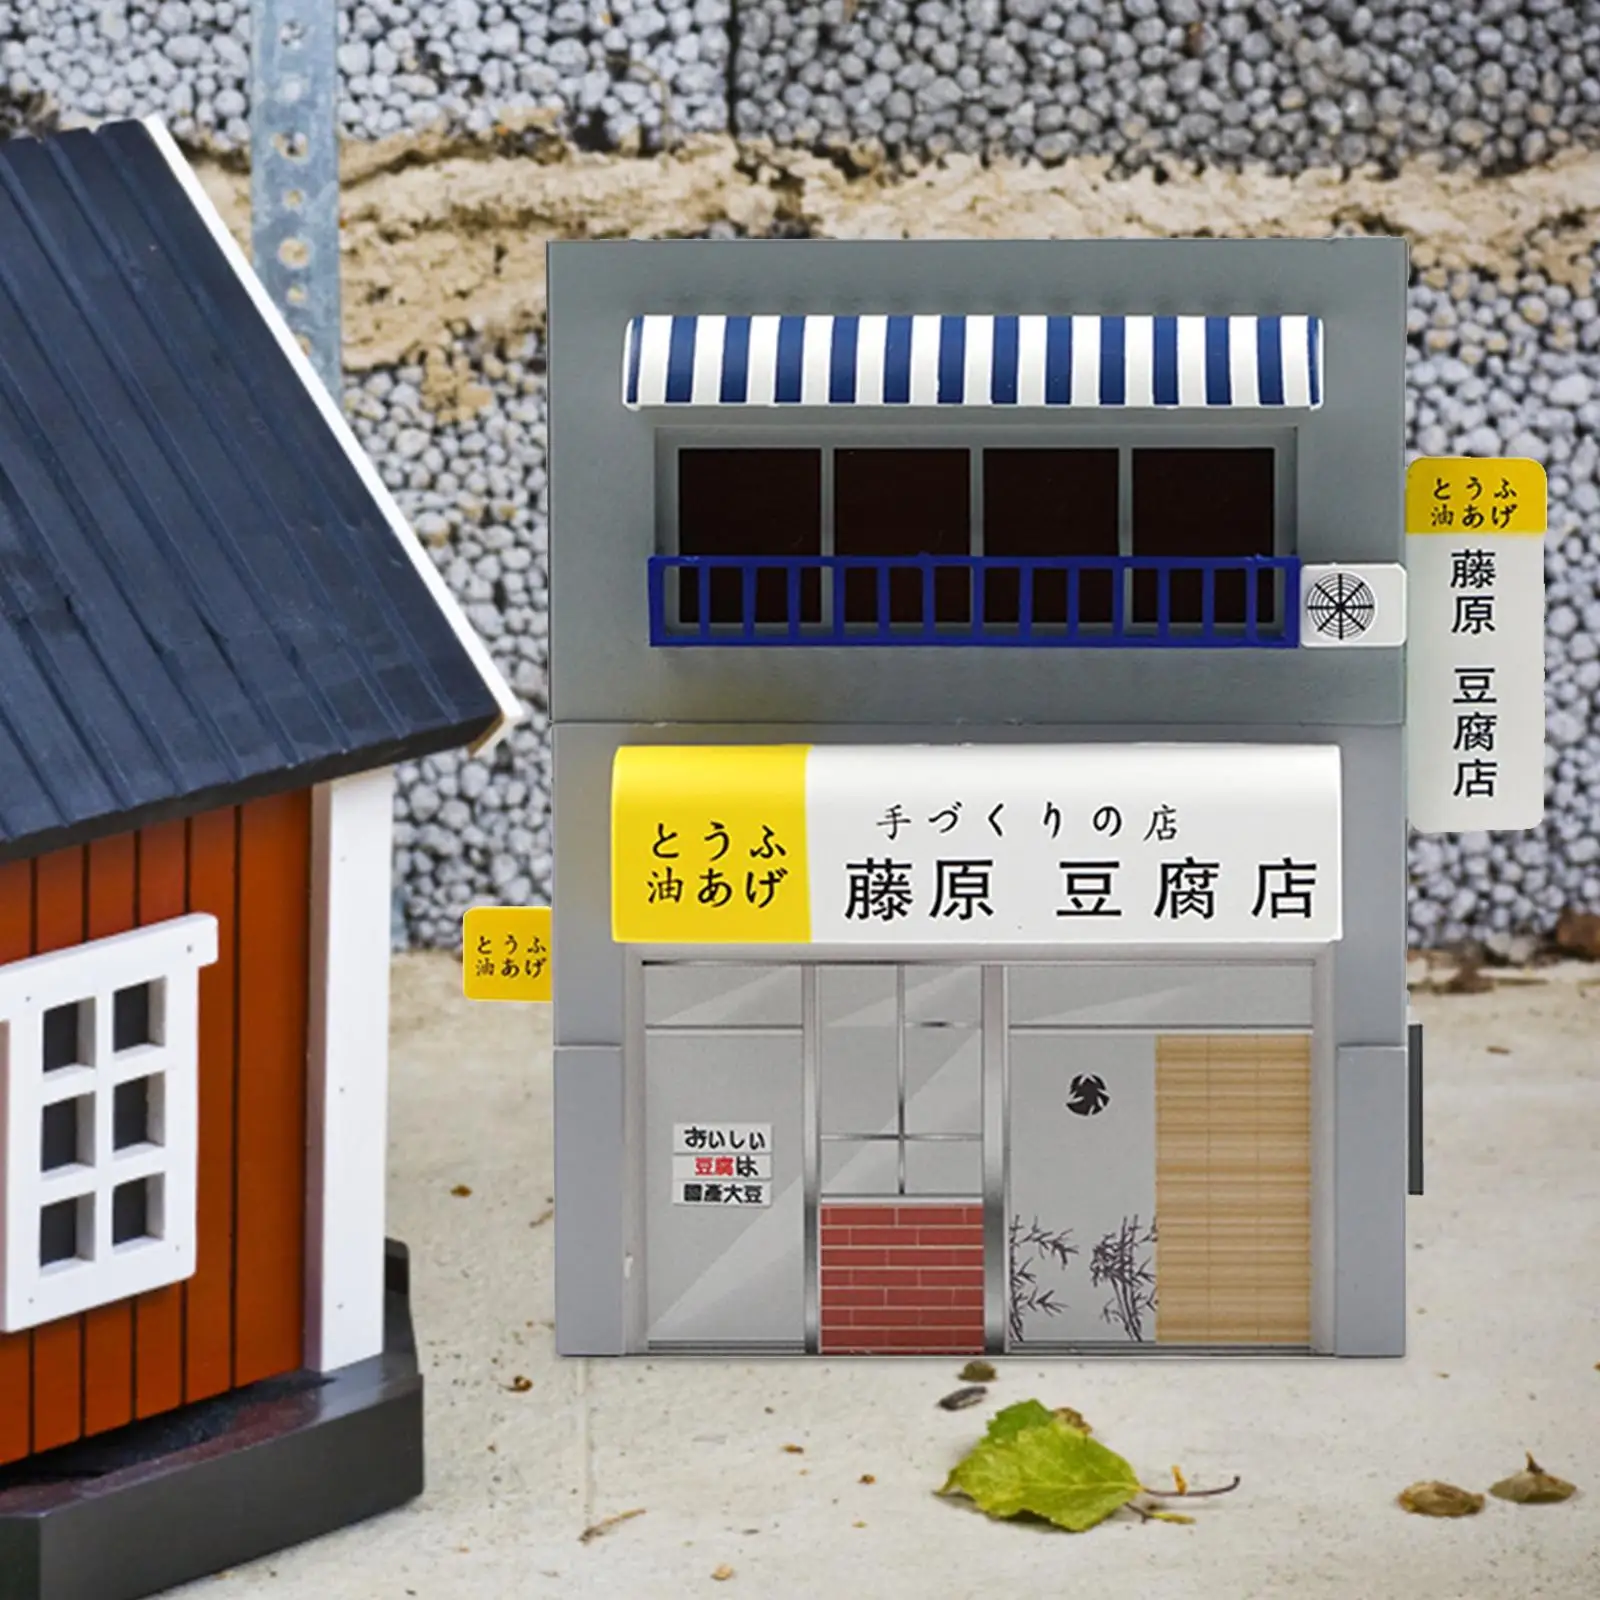 1/64 Tofu Shop Diorama Model Desktop Micro Landscape Sand Table Architectural S Scale Scenery Store DIY Projects Layout Ornament